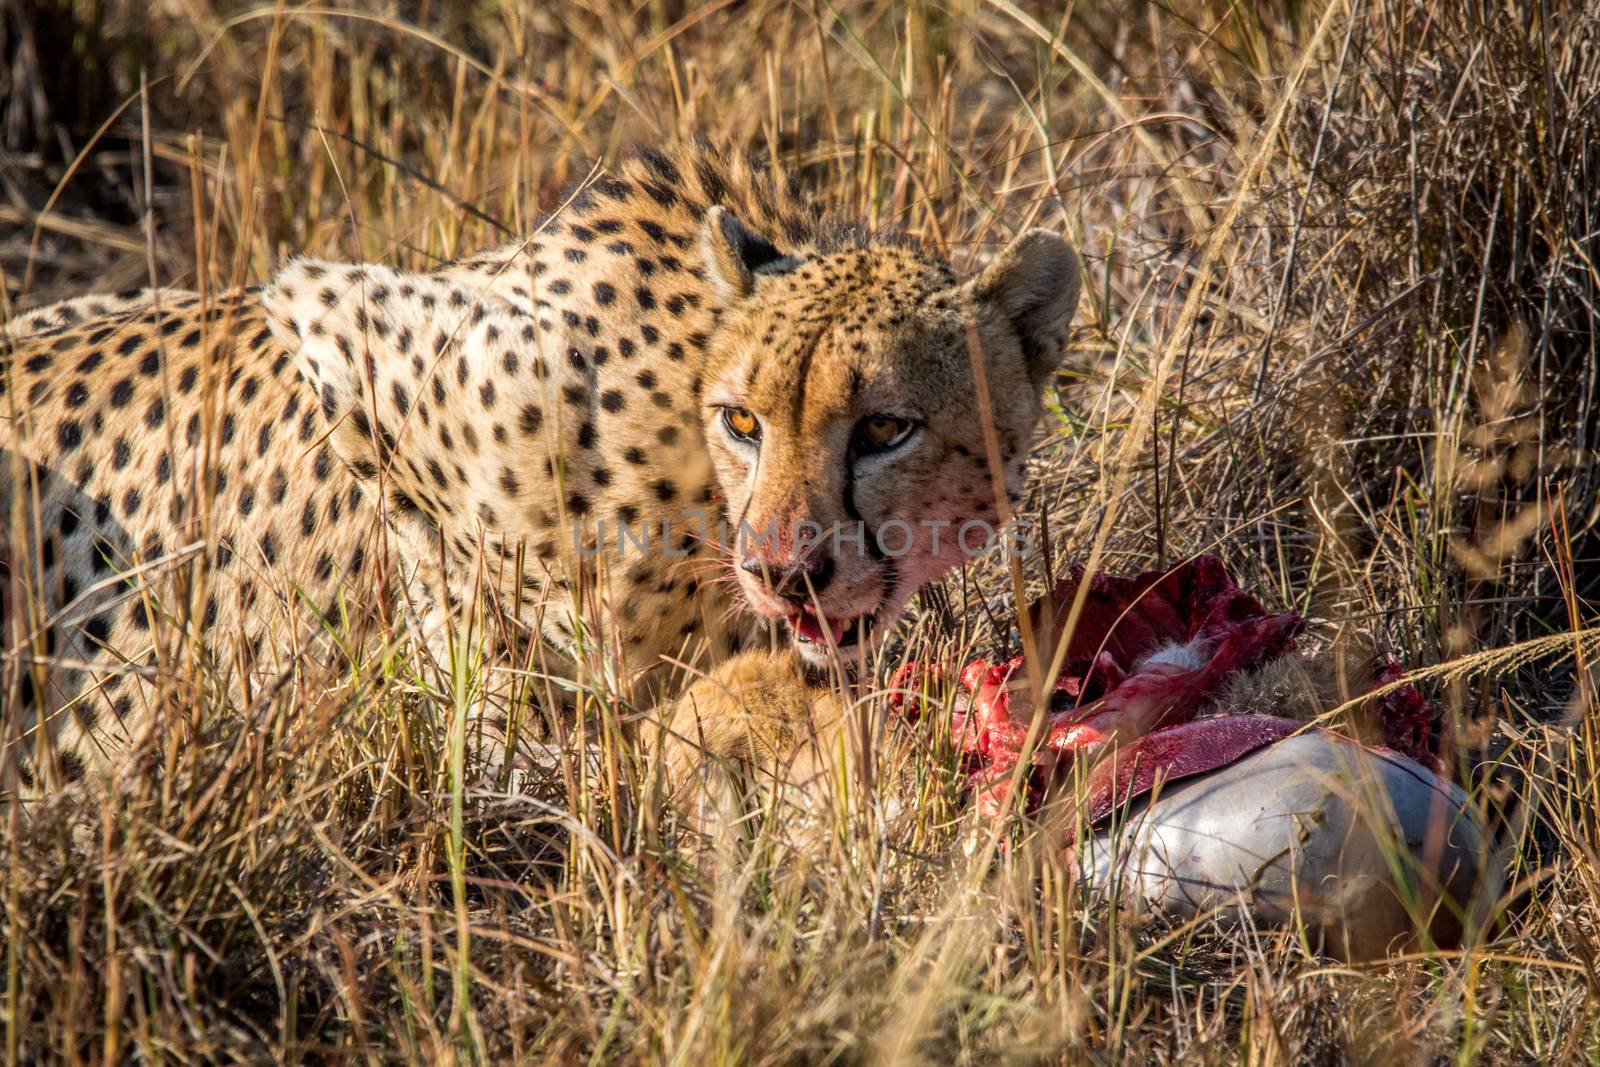 Cheetah eating from a Reedbuck carcass in the grass in the Sabi Sabi game reserve, South Africa.